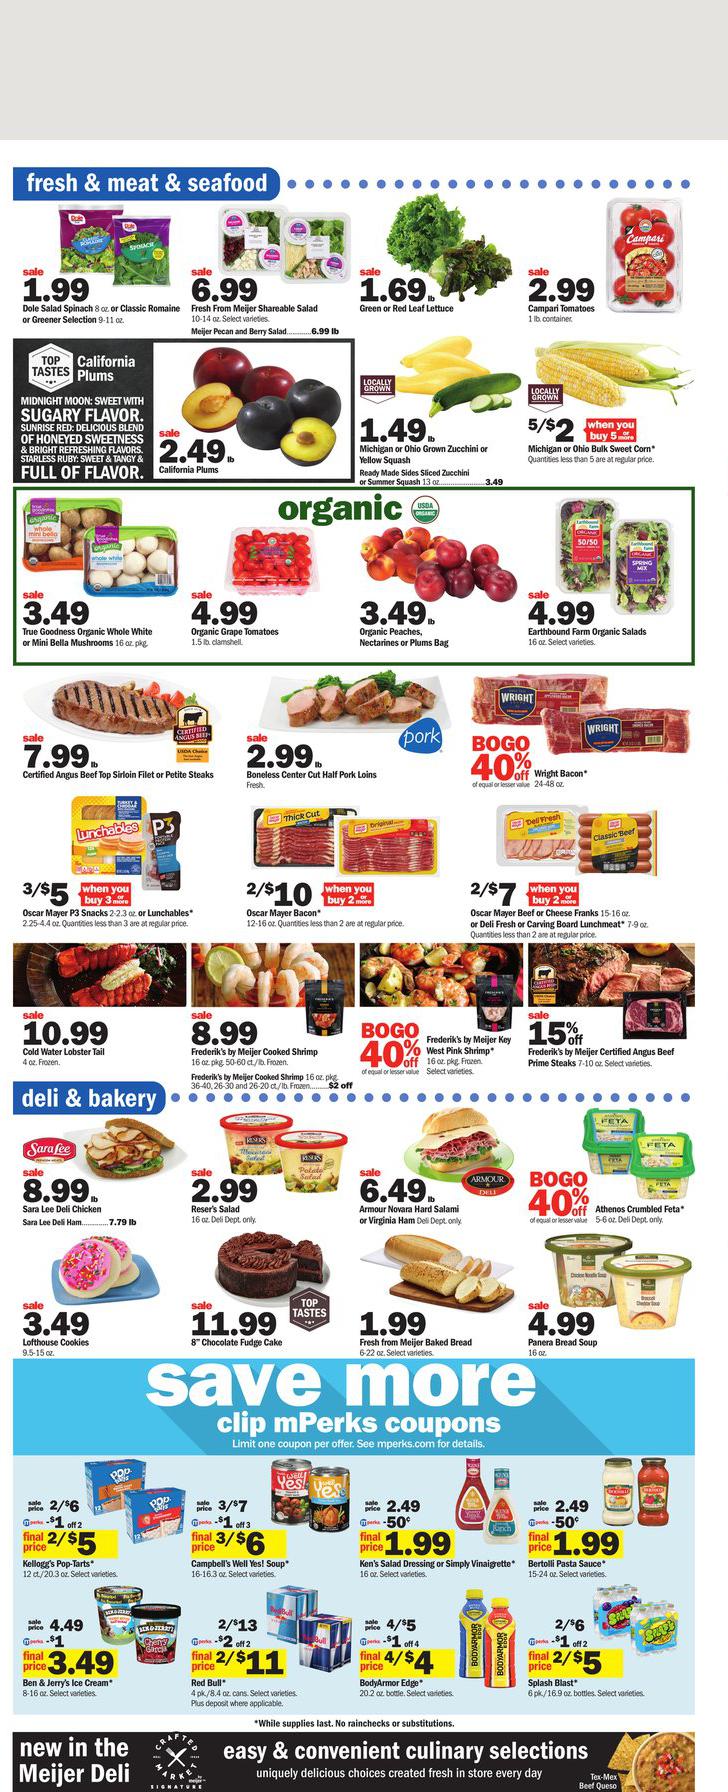 31.07.2022 Meijer ad 2. page